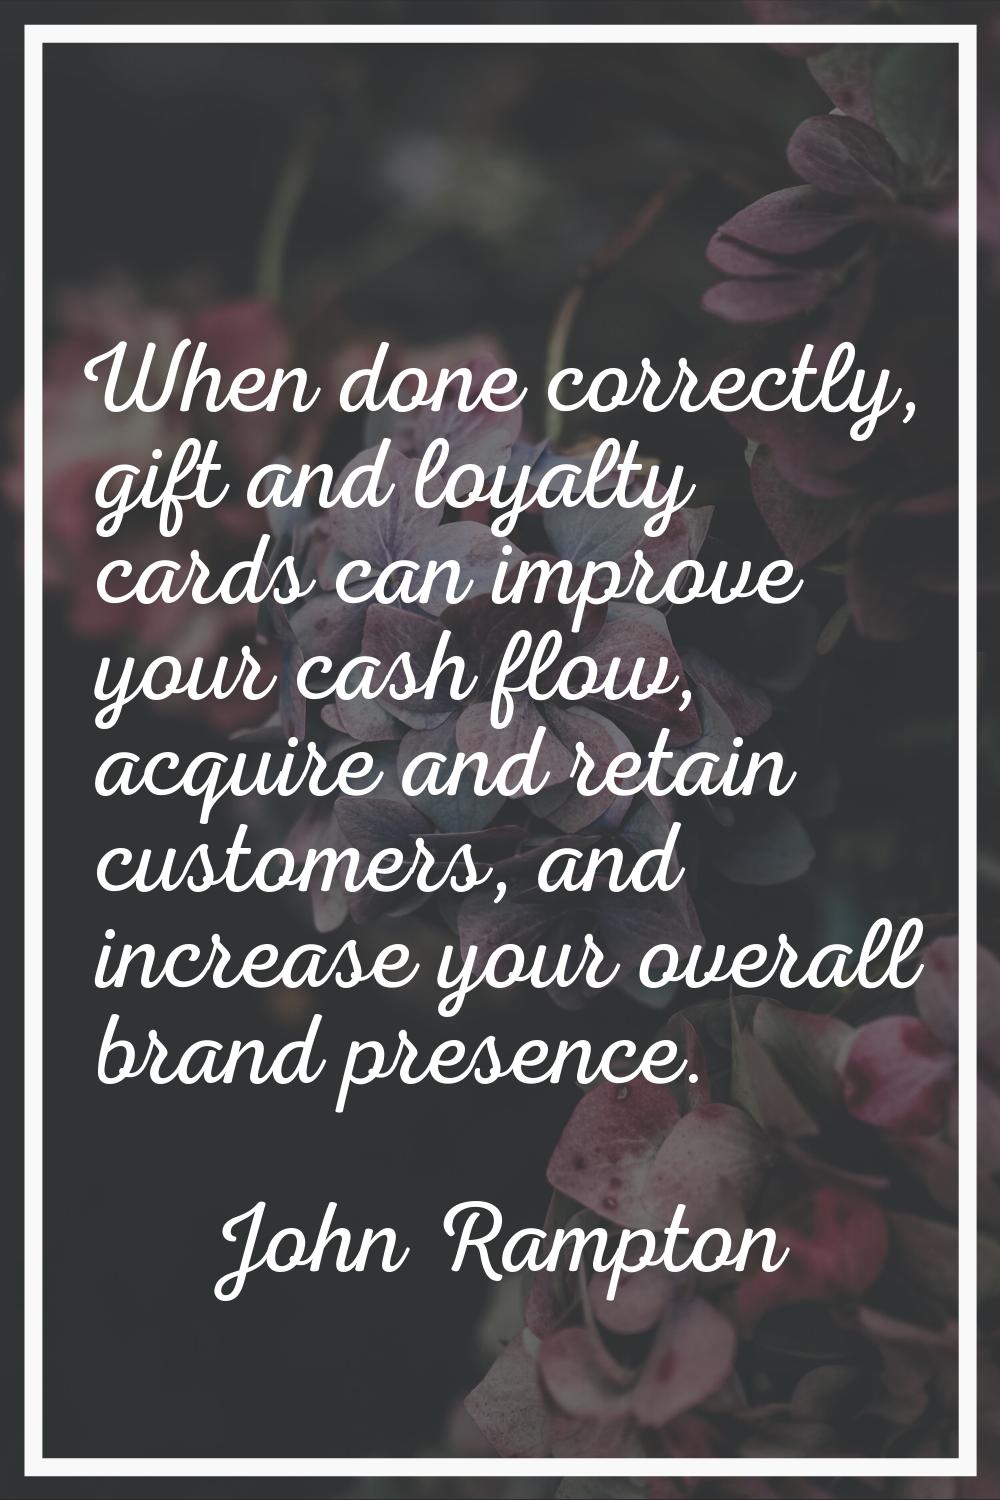 When done correctly, gift and loyalty cards can improve your cash flow, acquire and retain customer